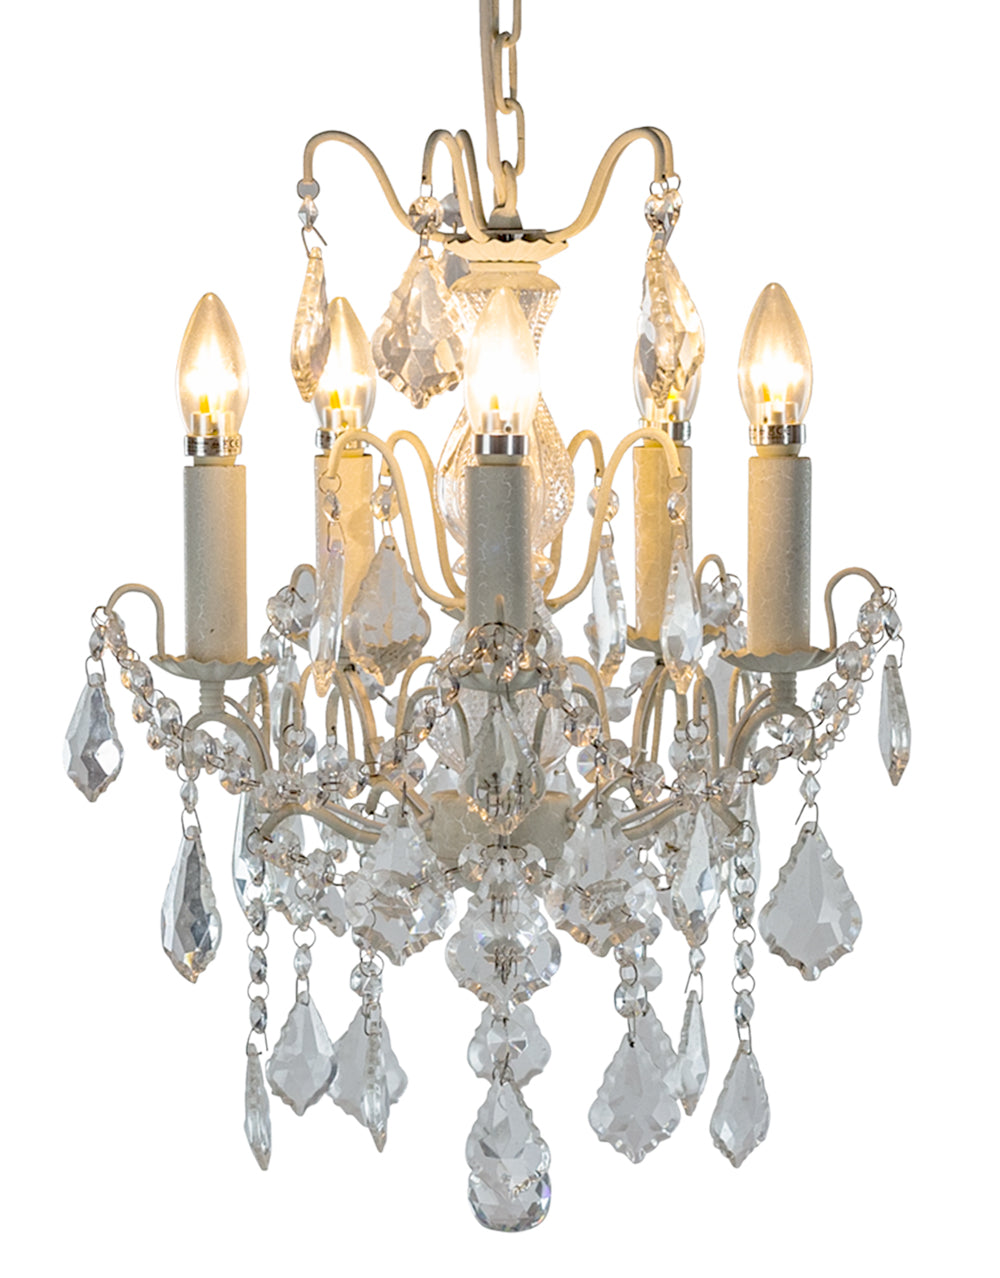 Antiqued Crackle White 5 Branch French Chandelier